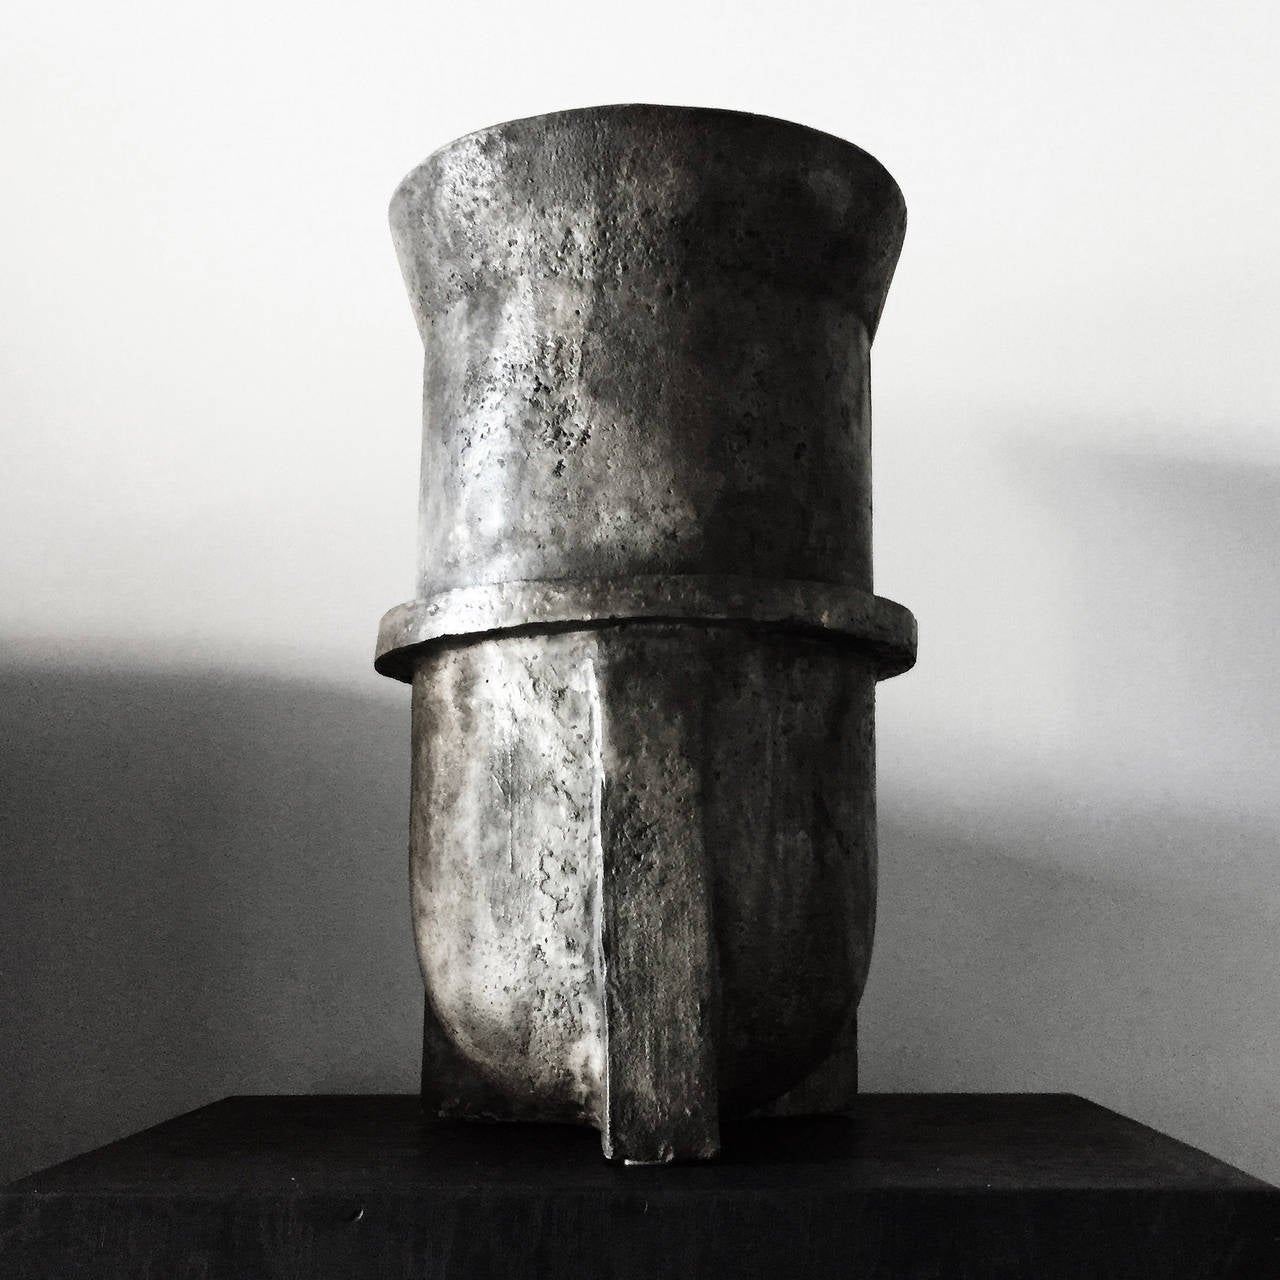 Bronze URN by Fashion Designer Rick Owens presented in Nitrate finish, also available in black and henna, please contact the gallery for more details. The large vessel has a monumental appearance and ancient feel, it can be used as a sculpture on a